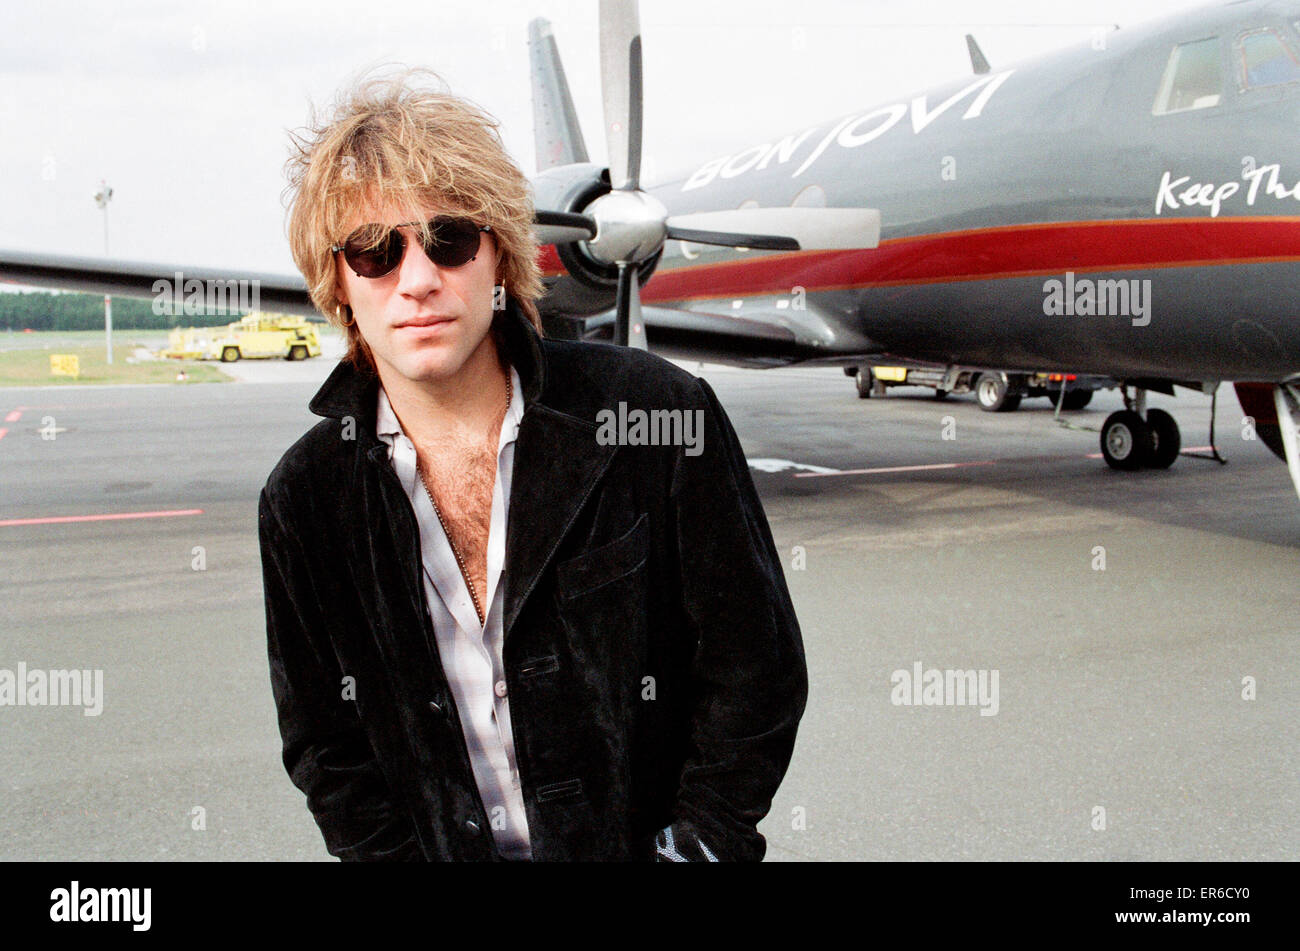 Jon Bon Jovi, lead singer of rock group Bon Jovi, pictured ahead of concert at the Bayreuth Arena, Bayreuth, Germany, 25th August 1993. 'I'll Sleep When I'm Dead Tour', a continuation of the 'Keep the Faith Tour'. Stock Photo